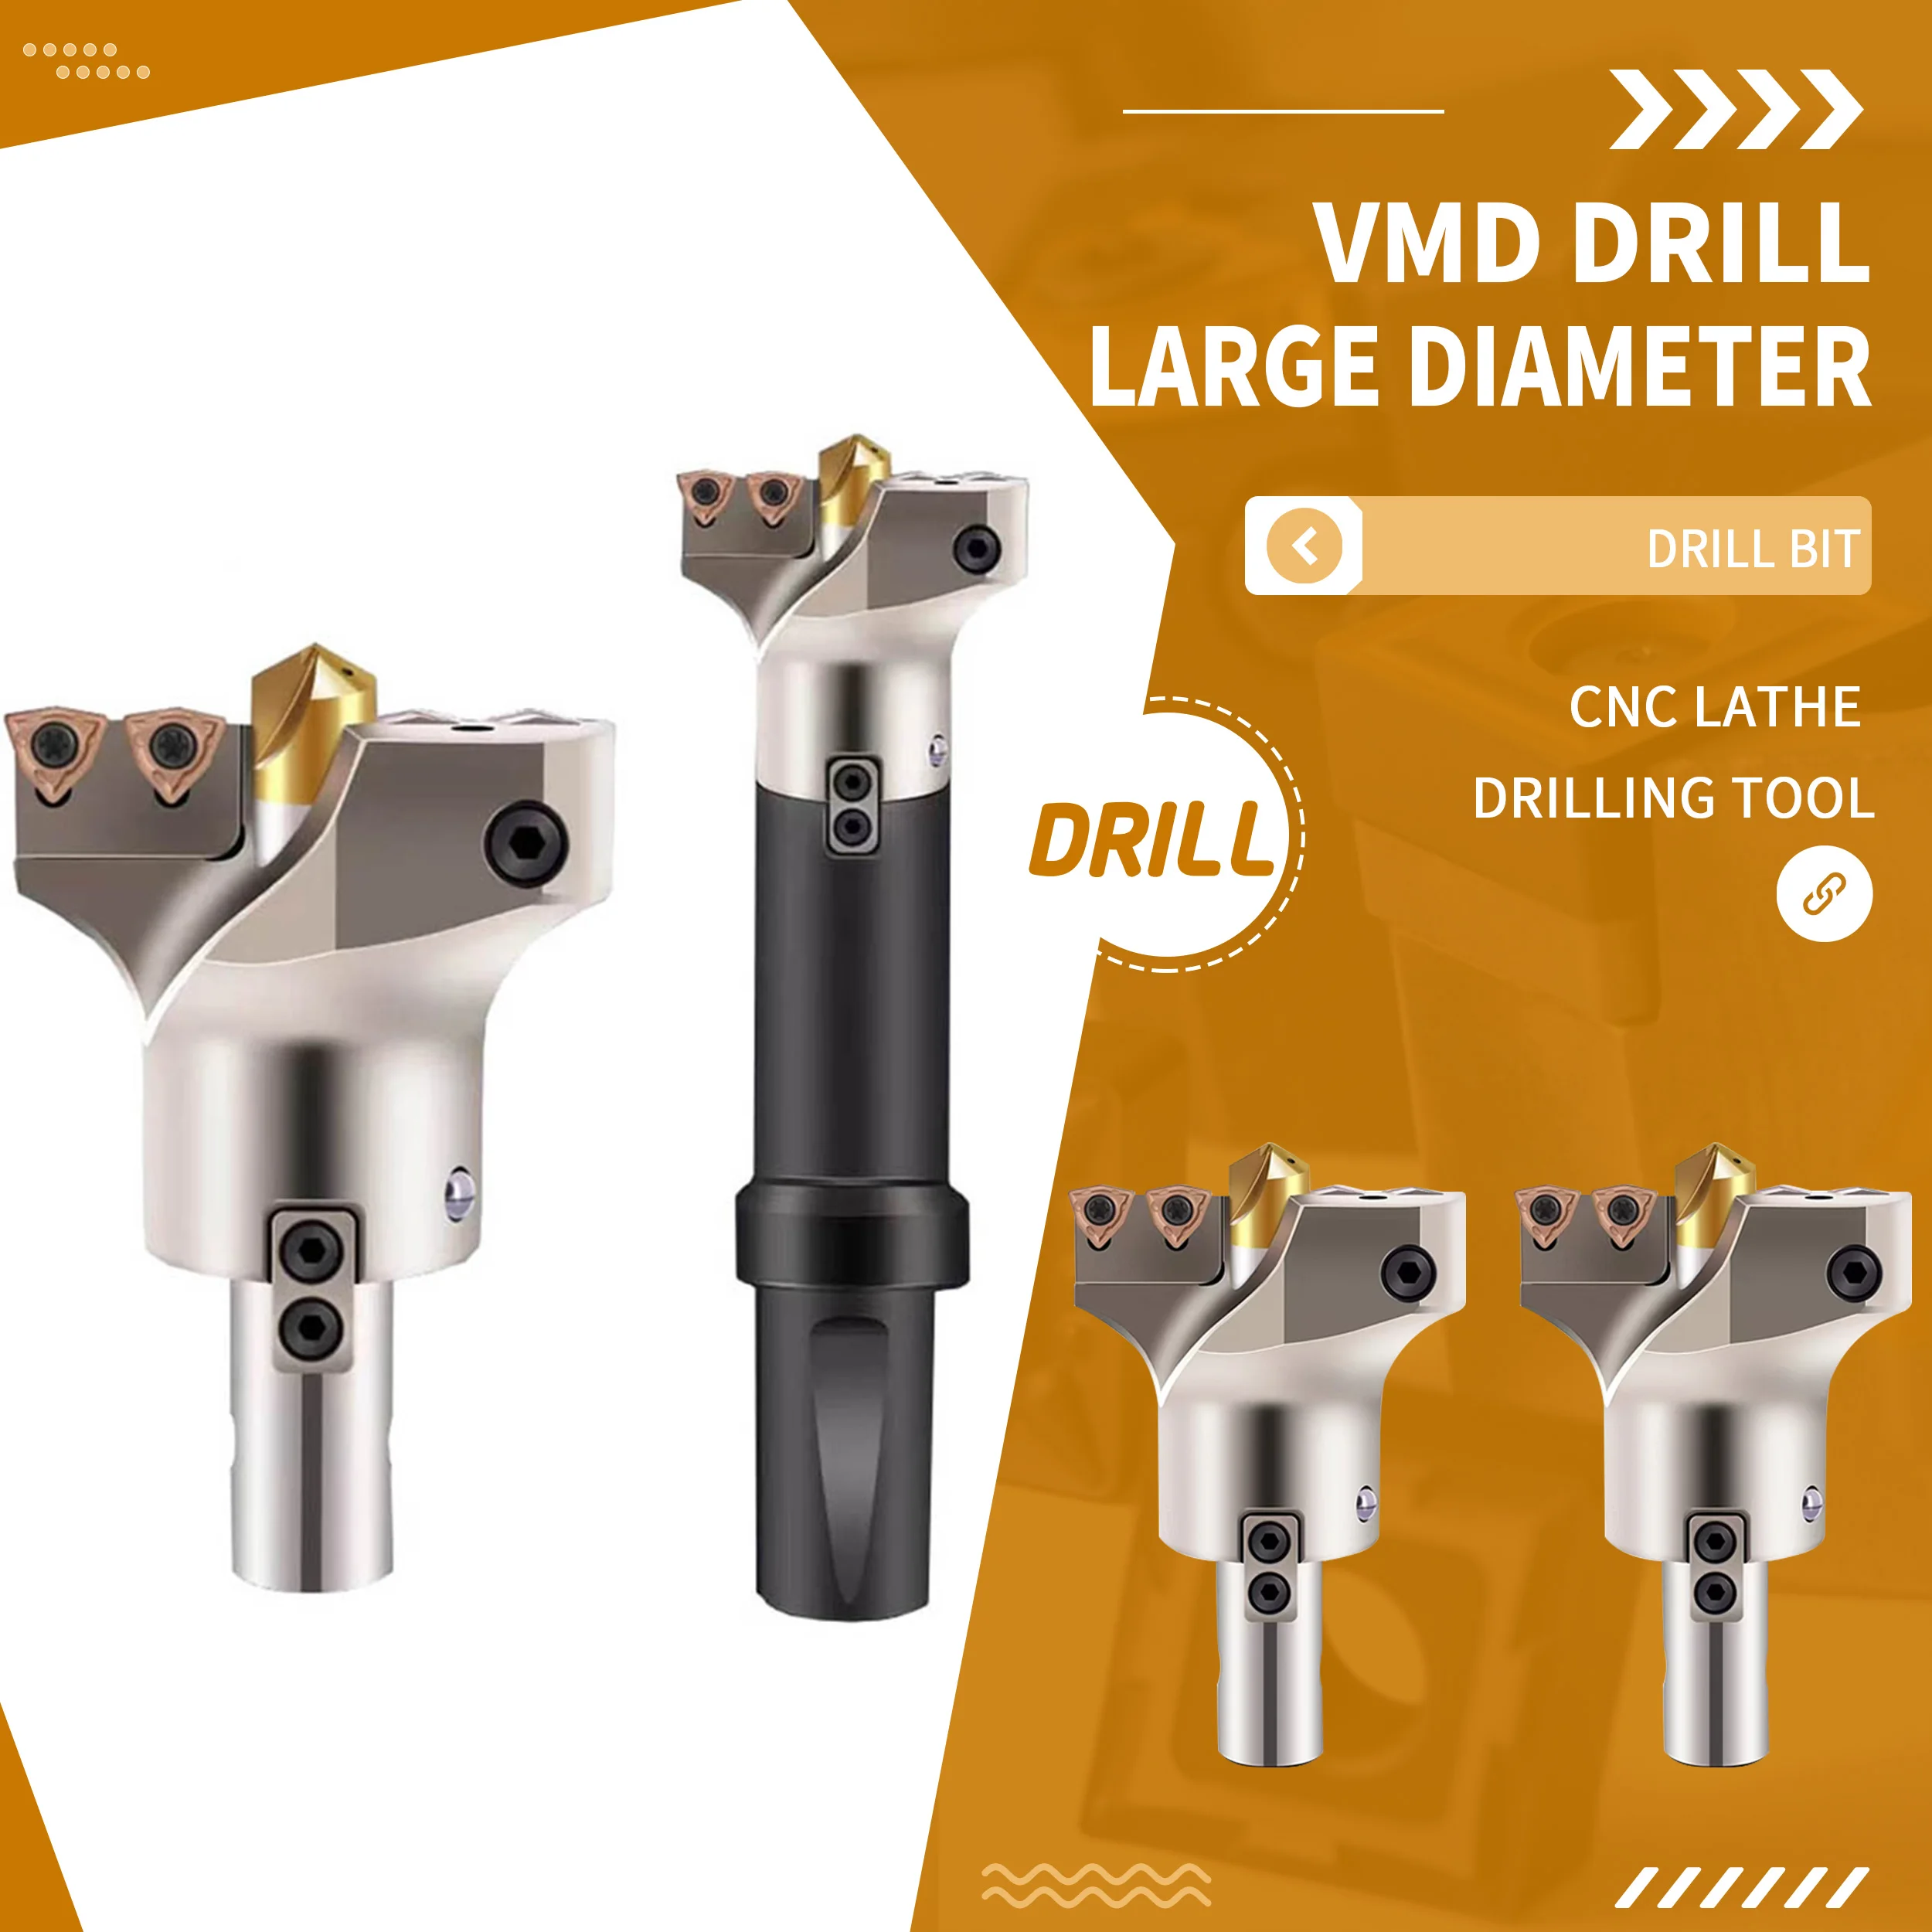 VMD Drill Large Diameter Deep Hole U Drill Bit 45mm To 200mm High Quality CNC Lathe Drill Tools,For WCMX WCMT Positioner Inserts